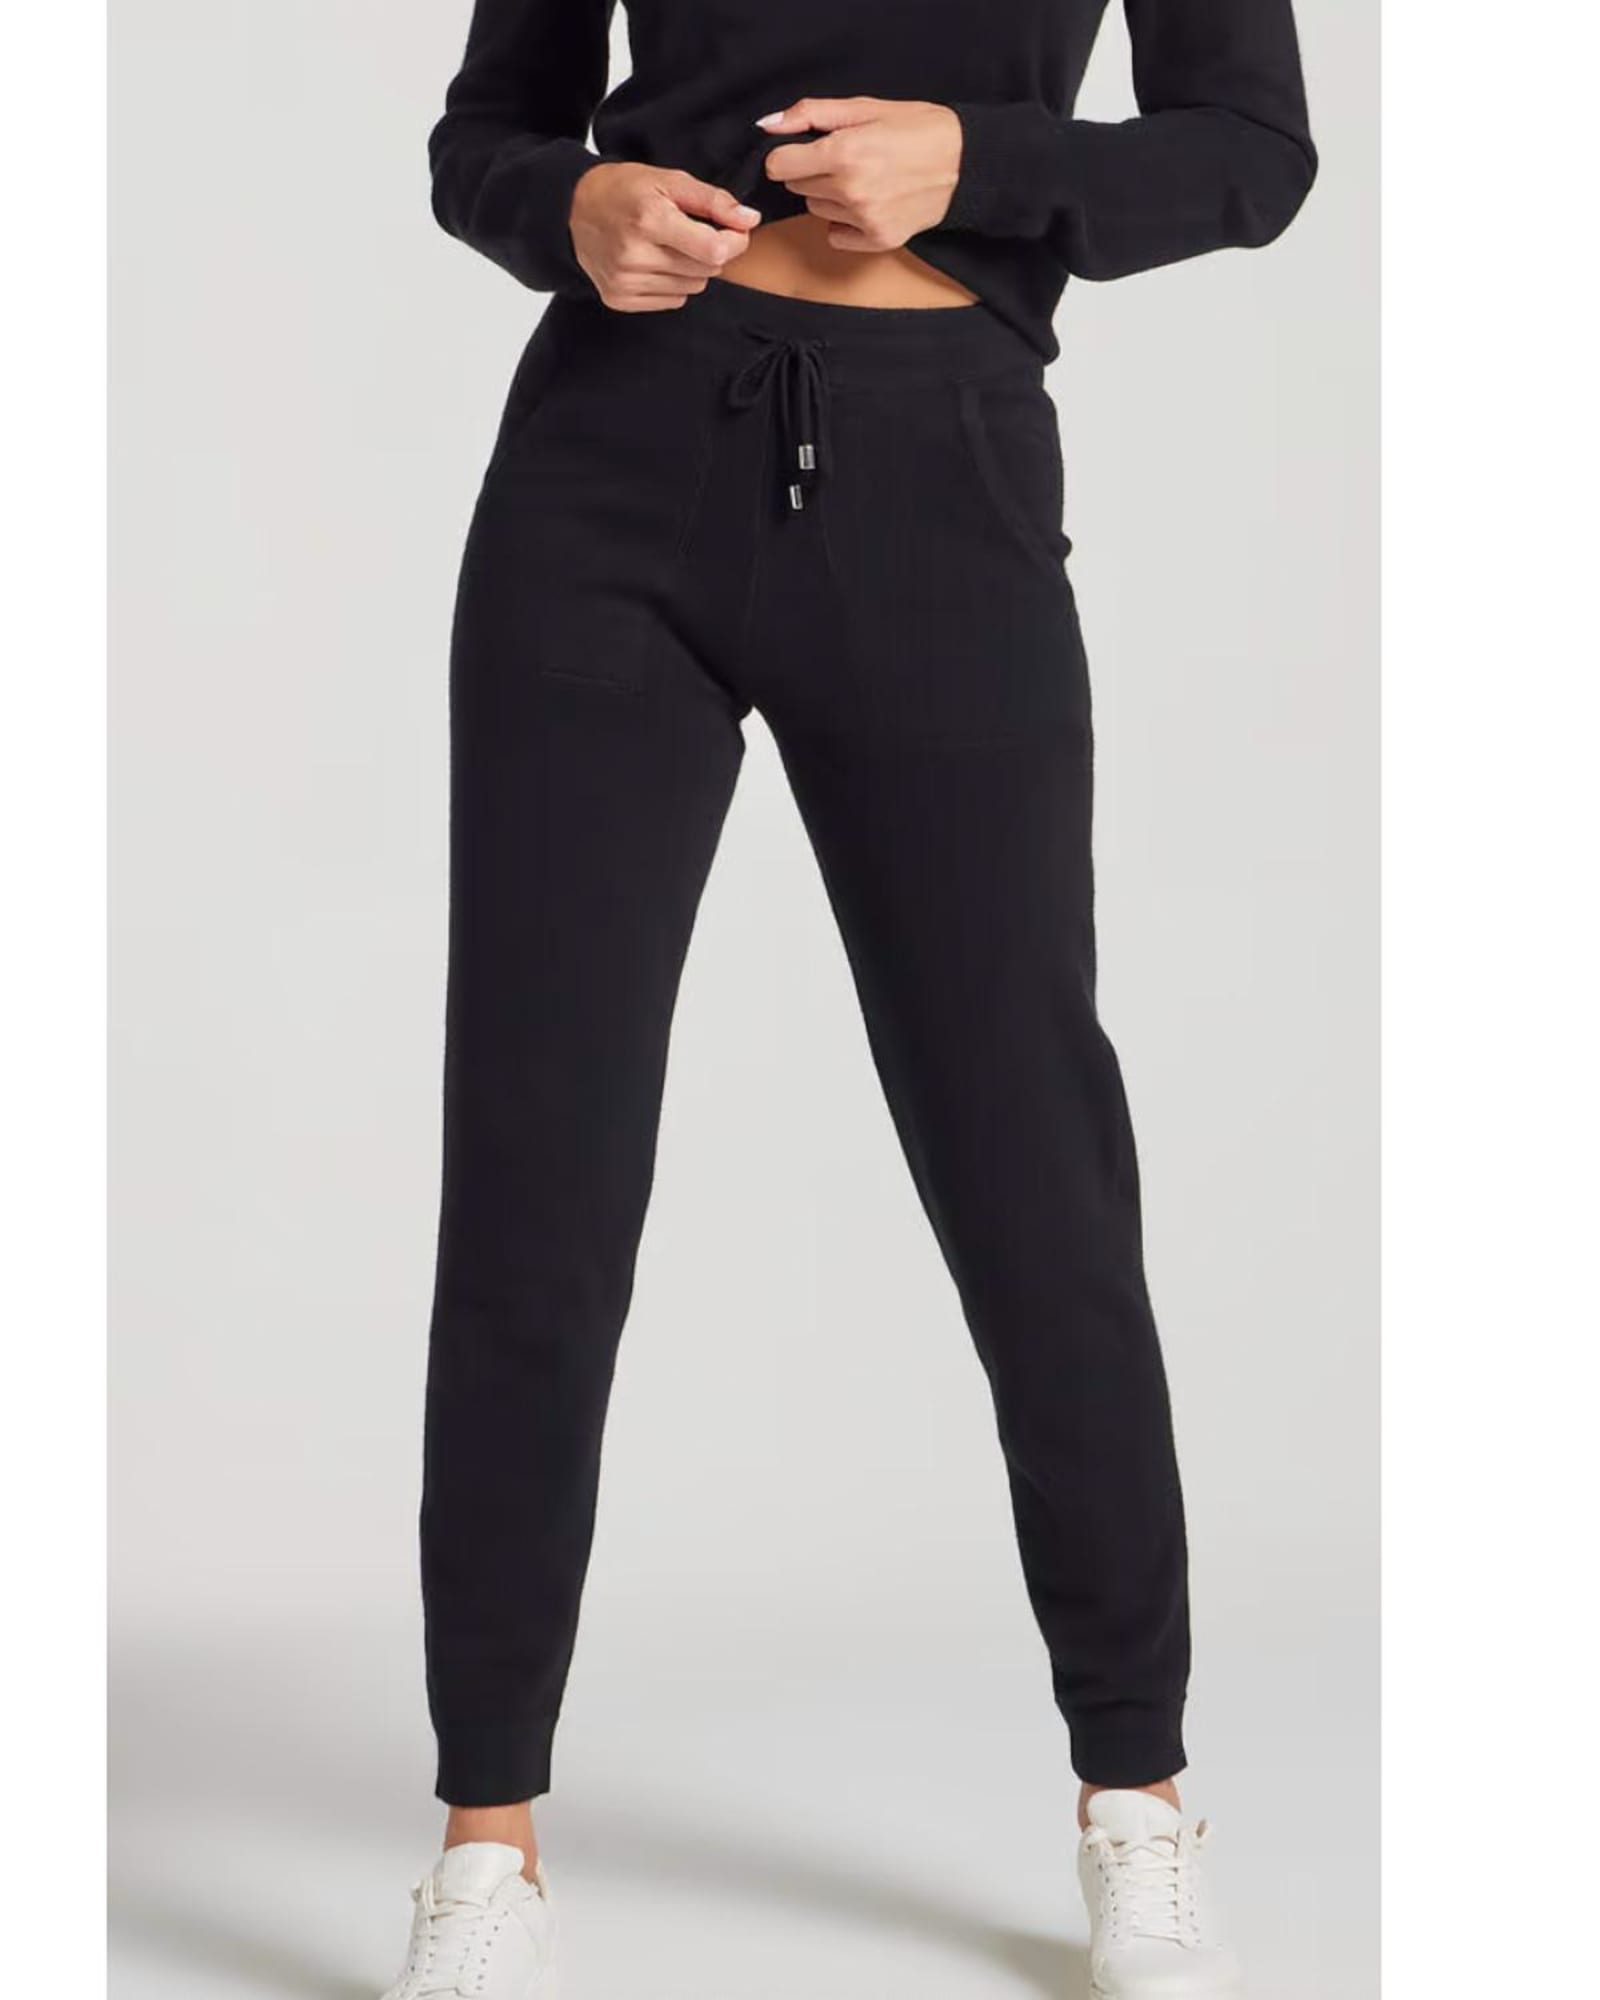 Plus Size Wide Leg Elastic Waistband Pants With Slit At Cuff